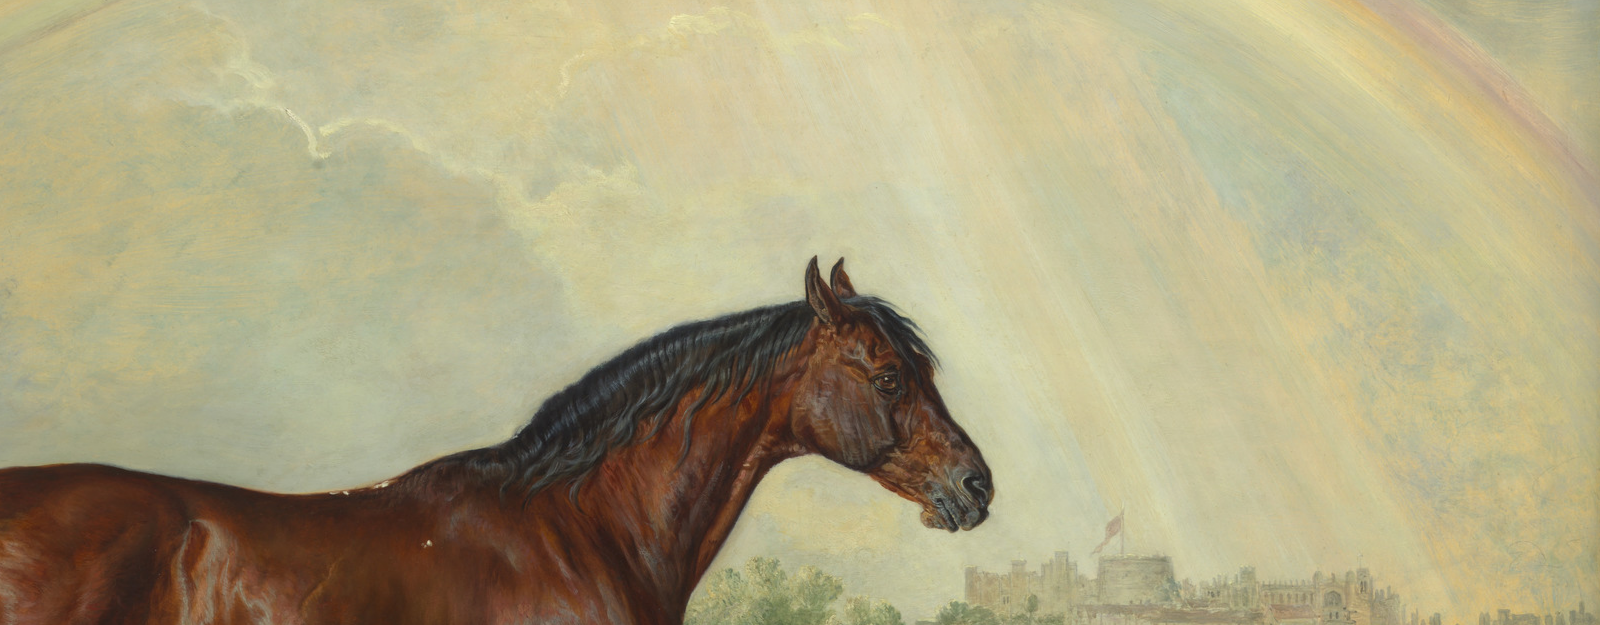 Painting of horse and rainbow above